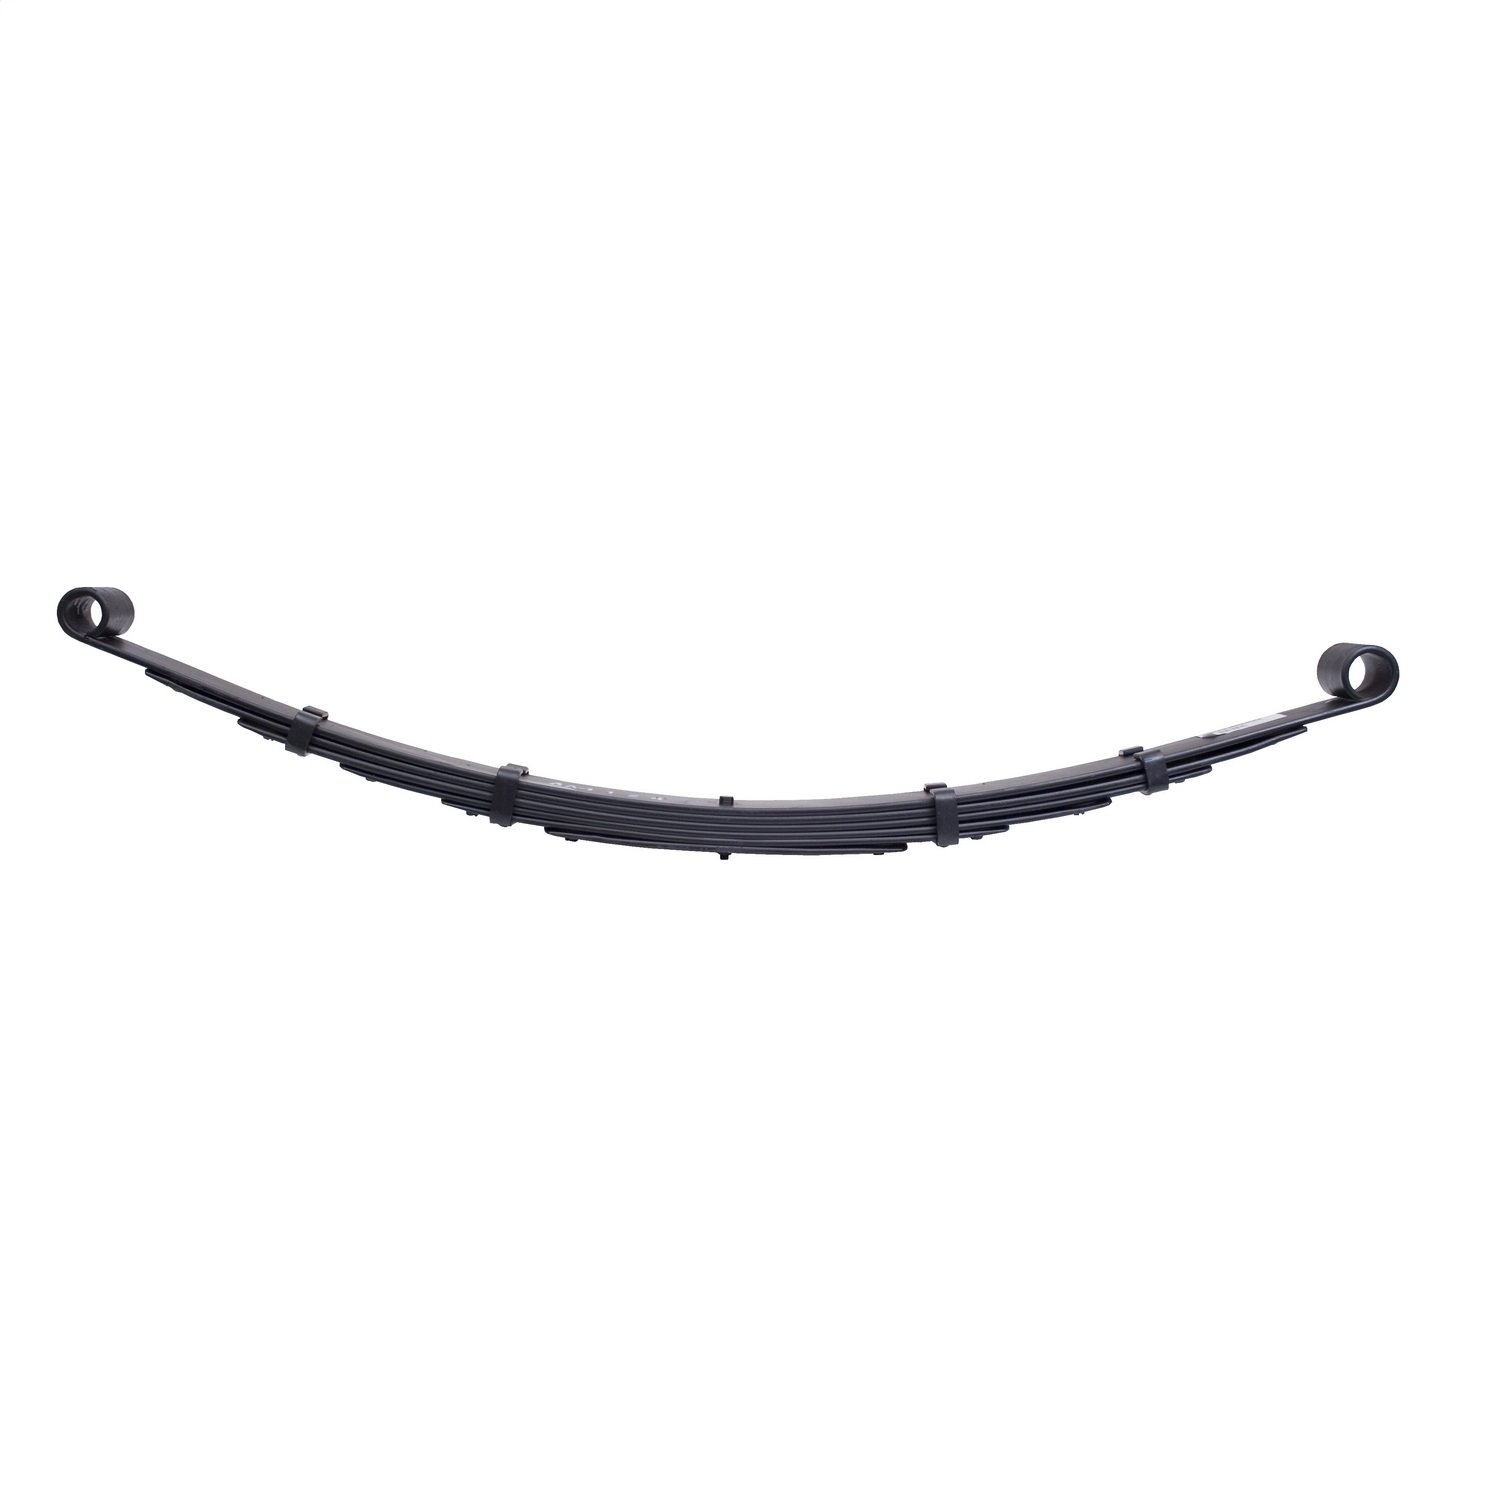 Replacement rear leaf spring from Omix-ADA has 6